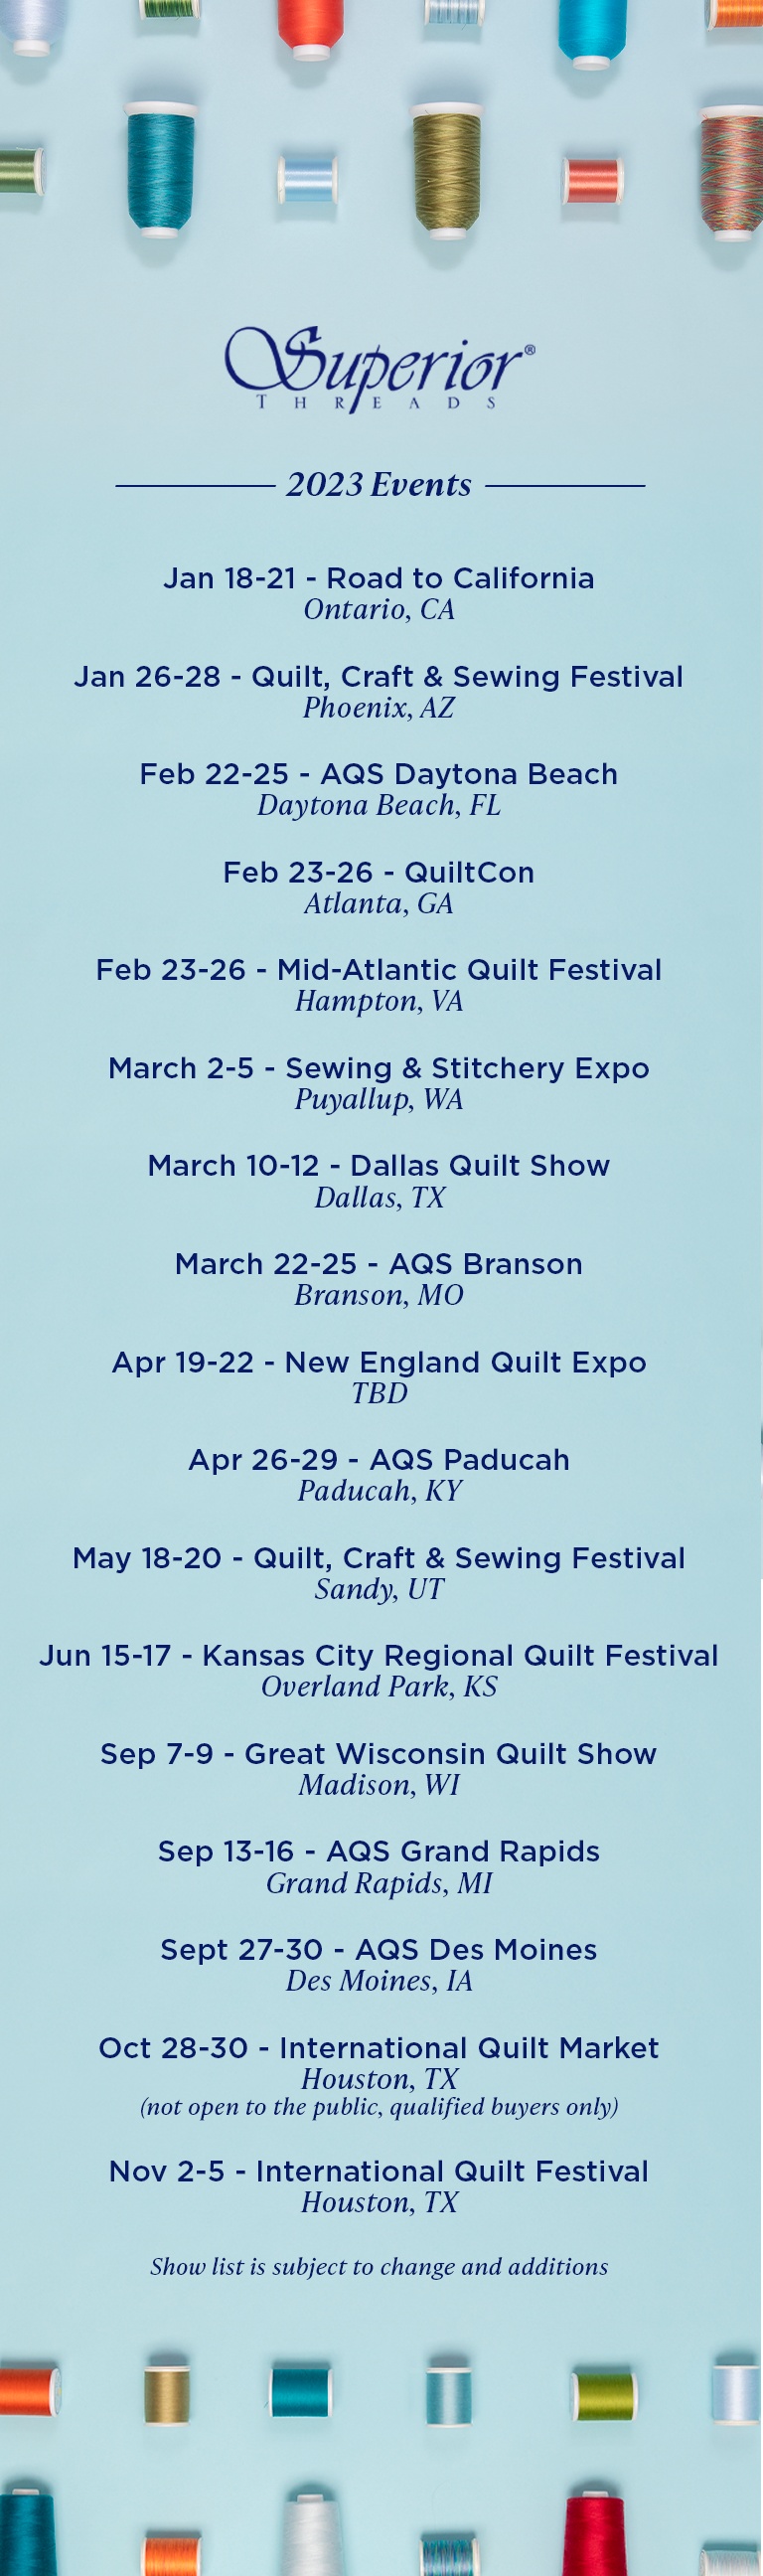 Shows and Events